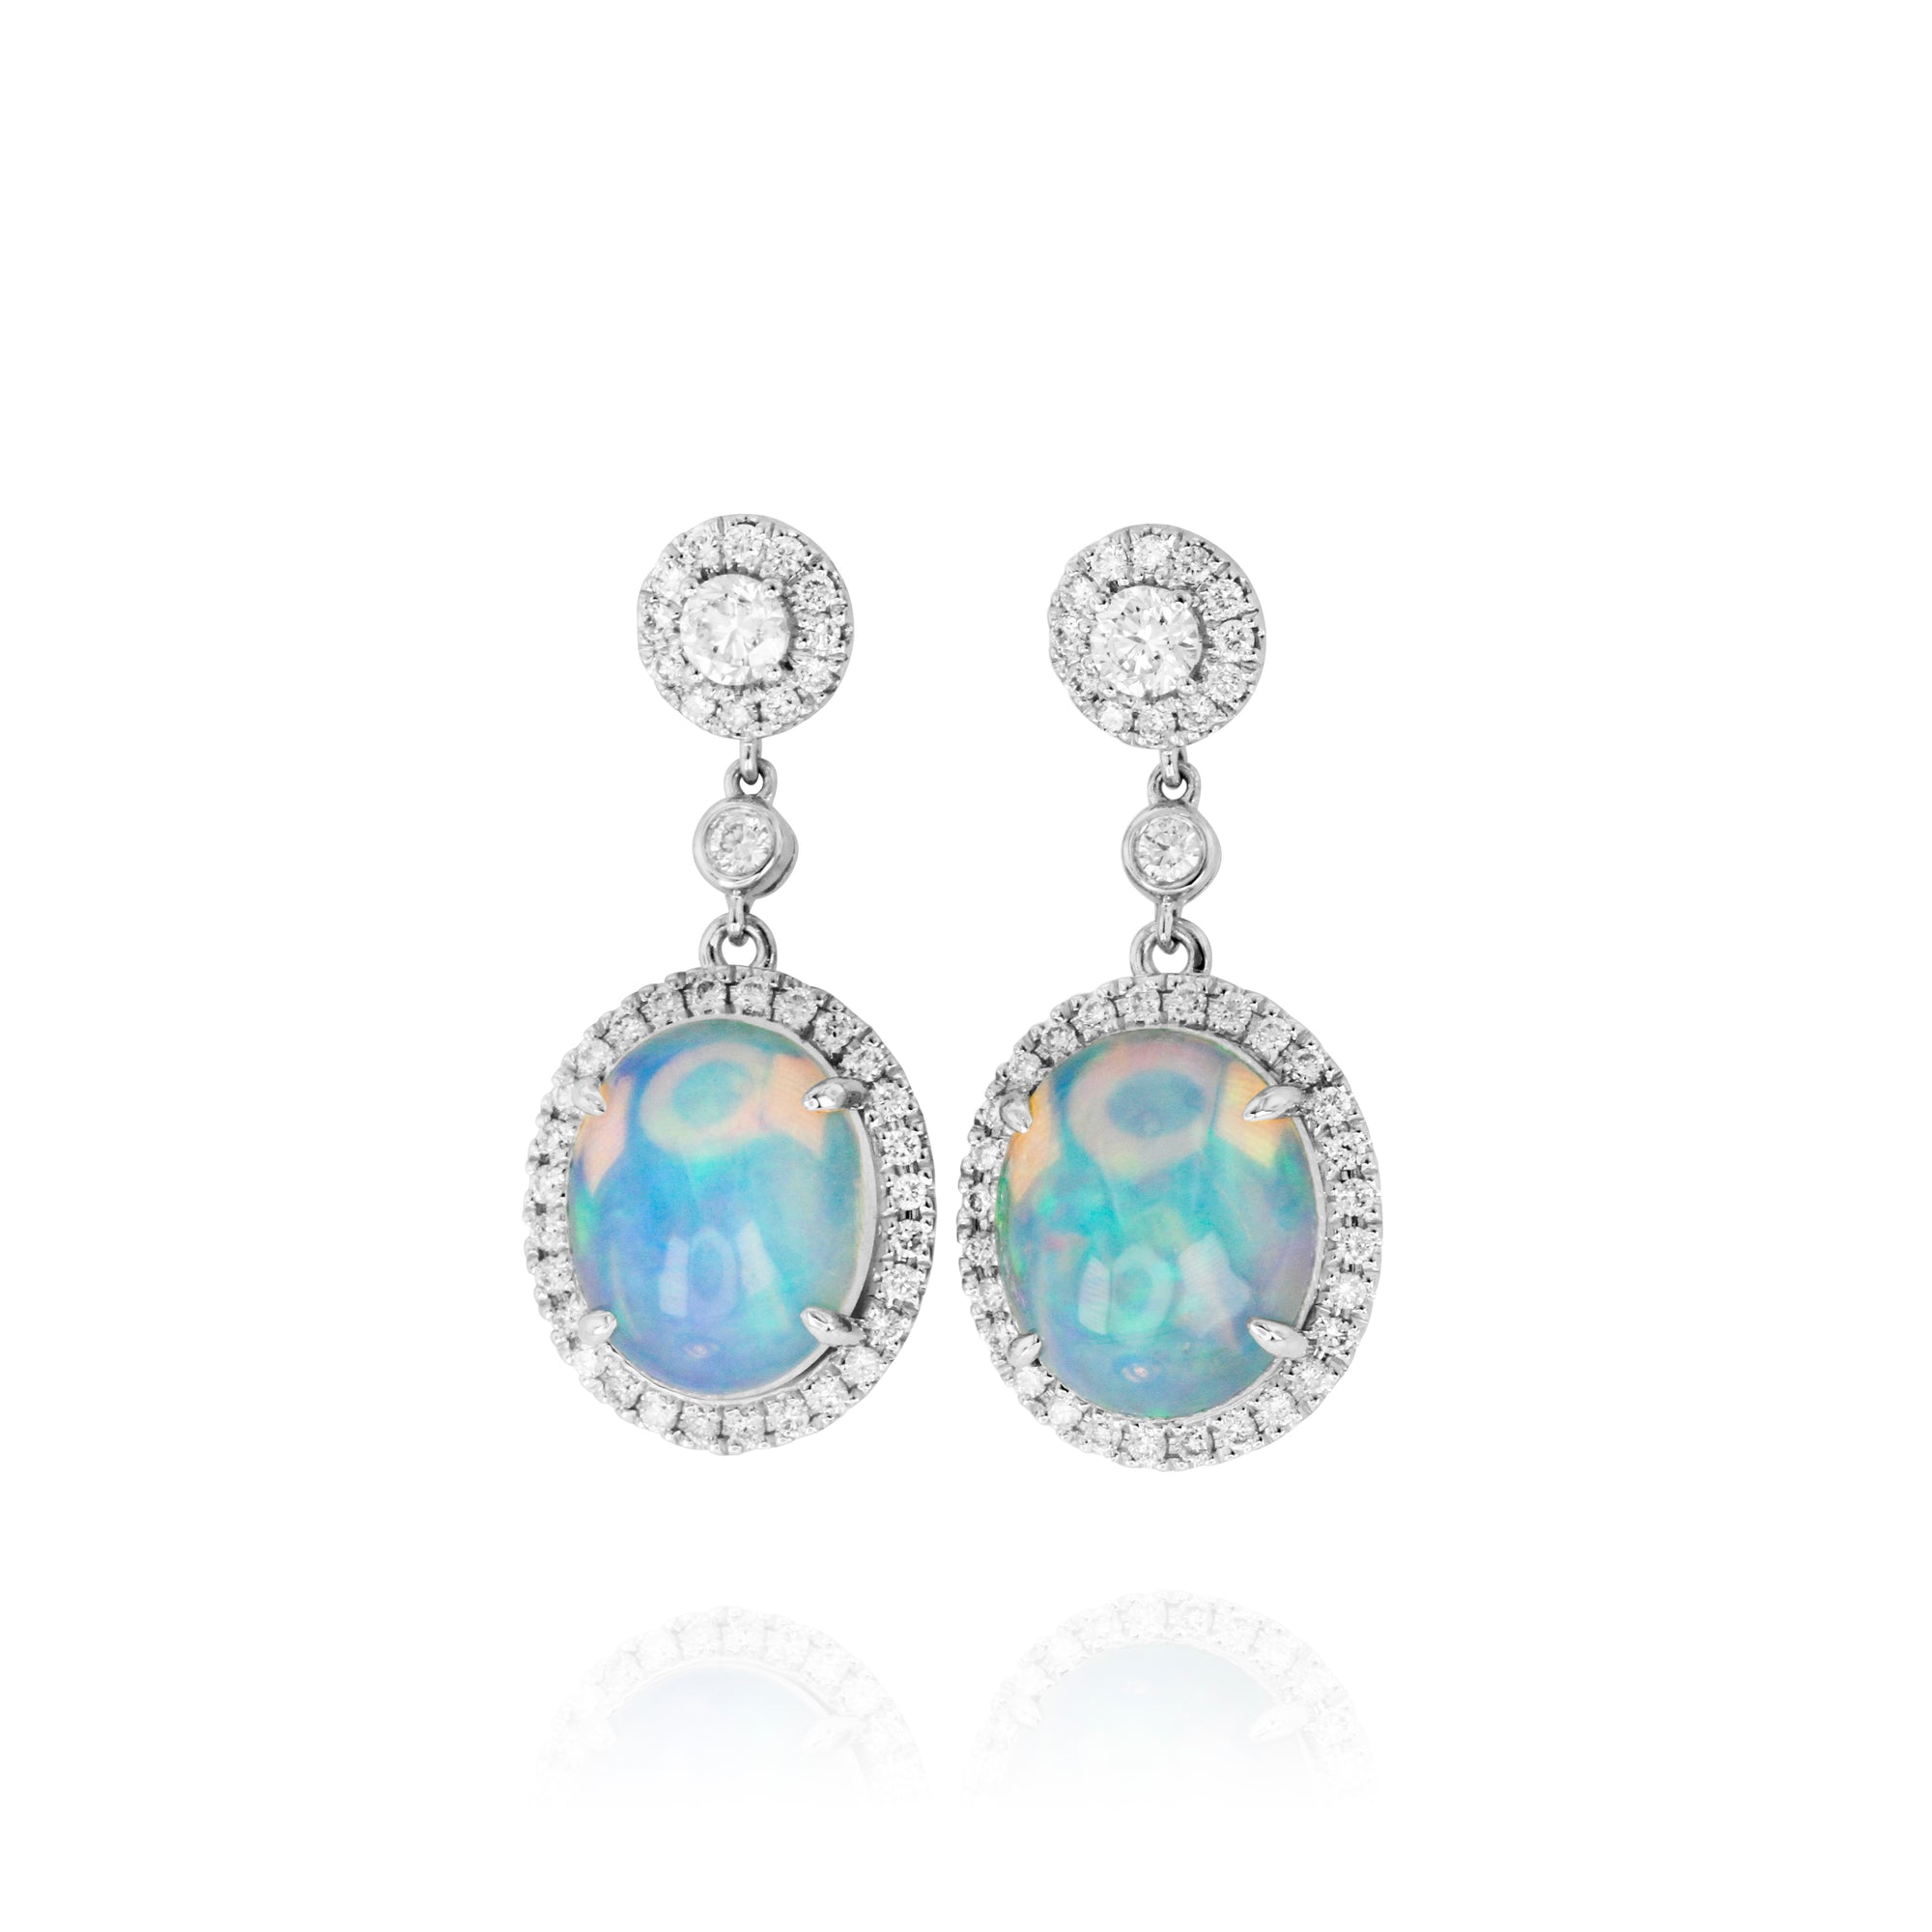 Opal and Diamond Drop Earrings by Yael - White Gold - Talisman Collection Fine Jewelers